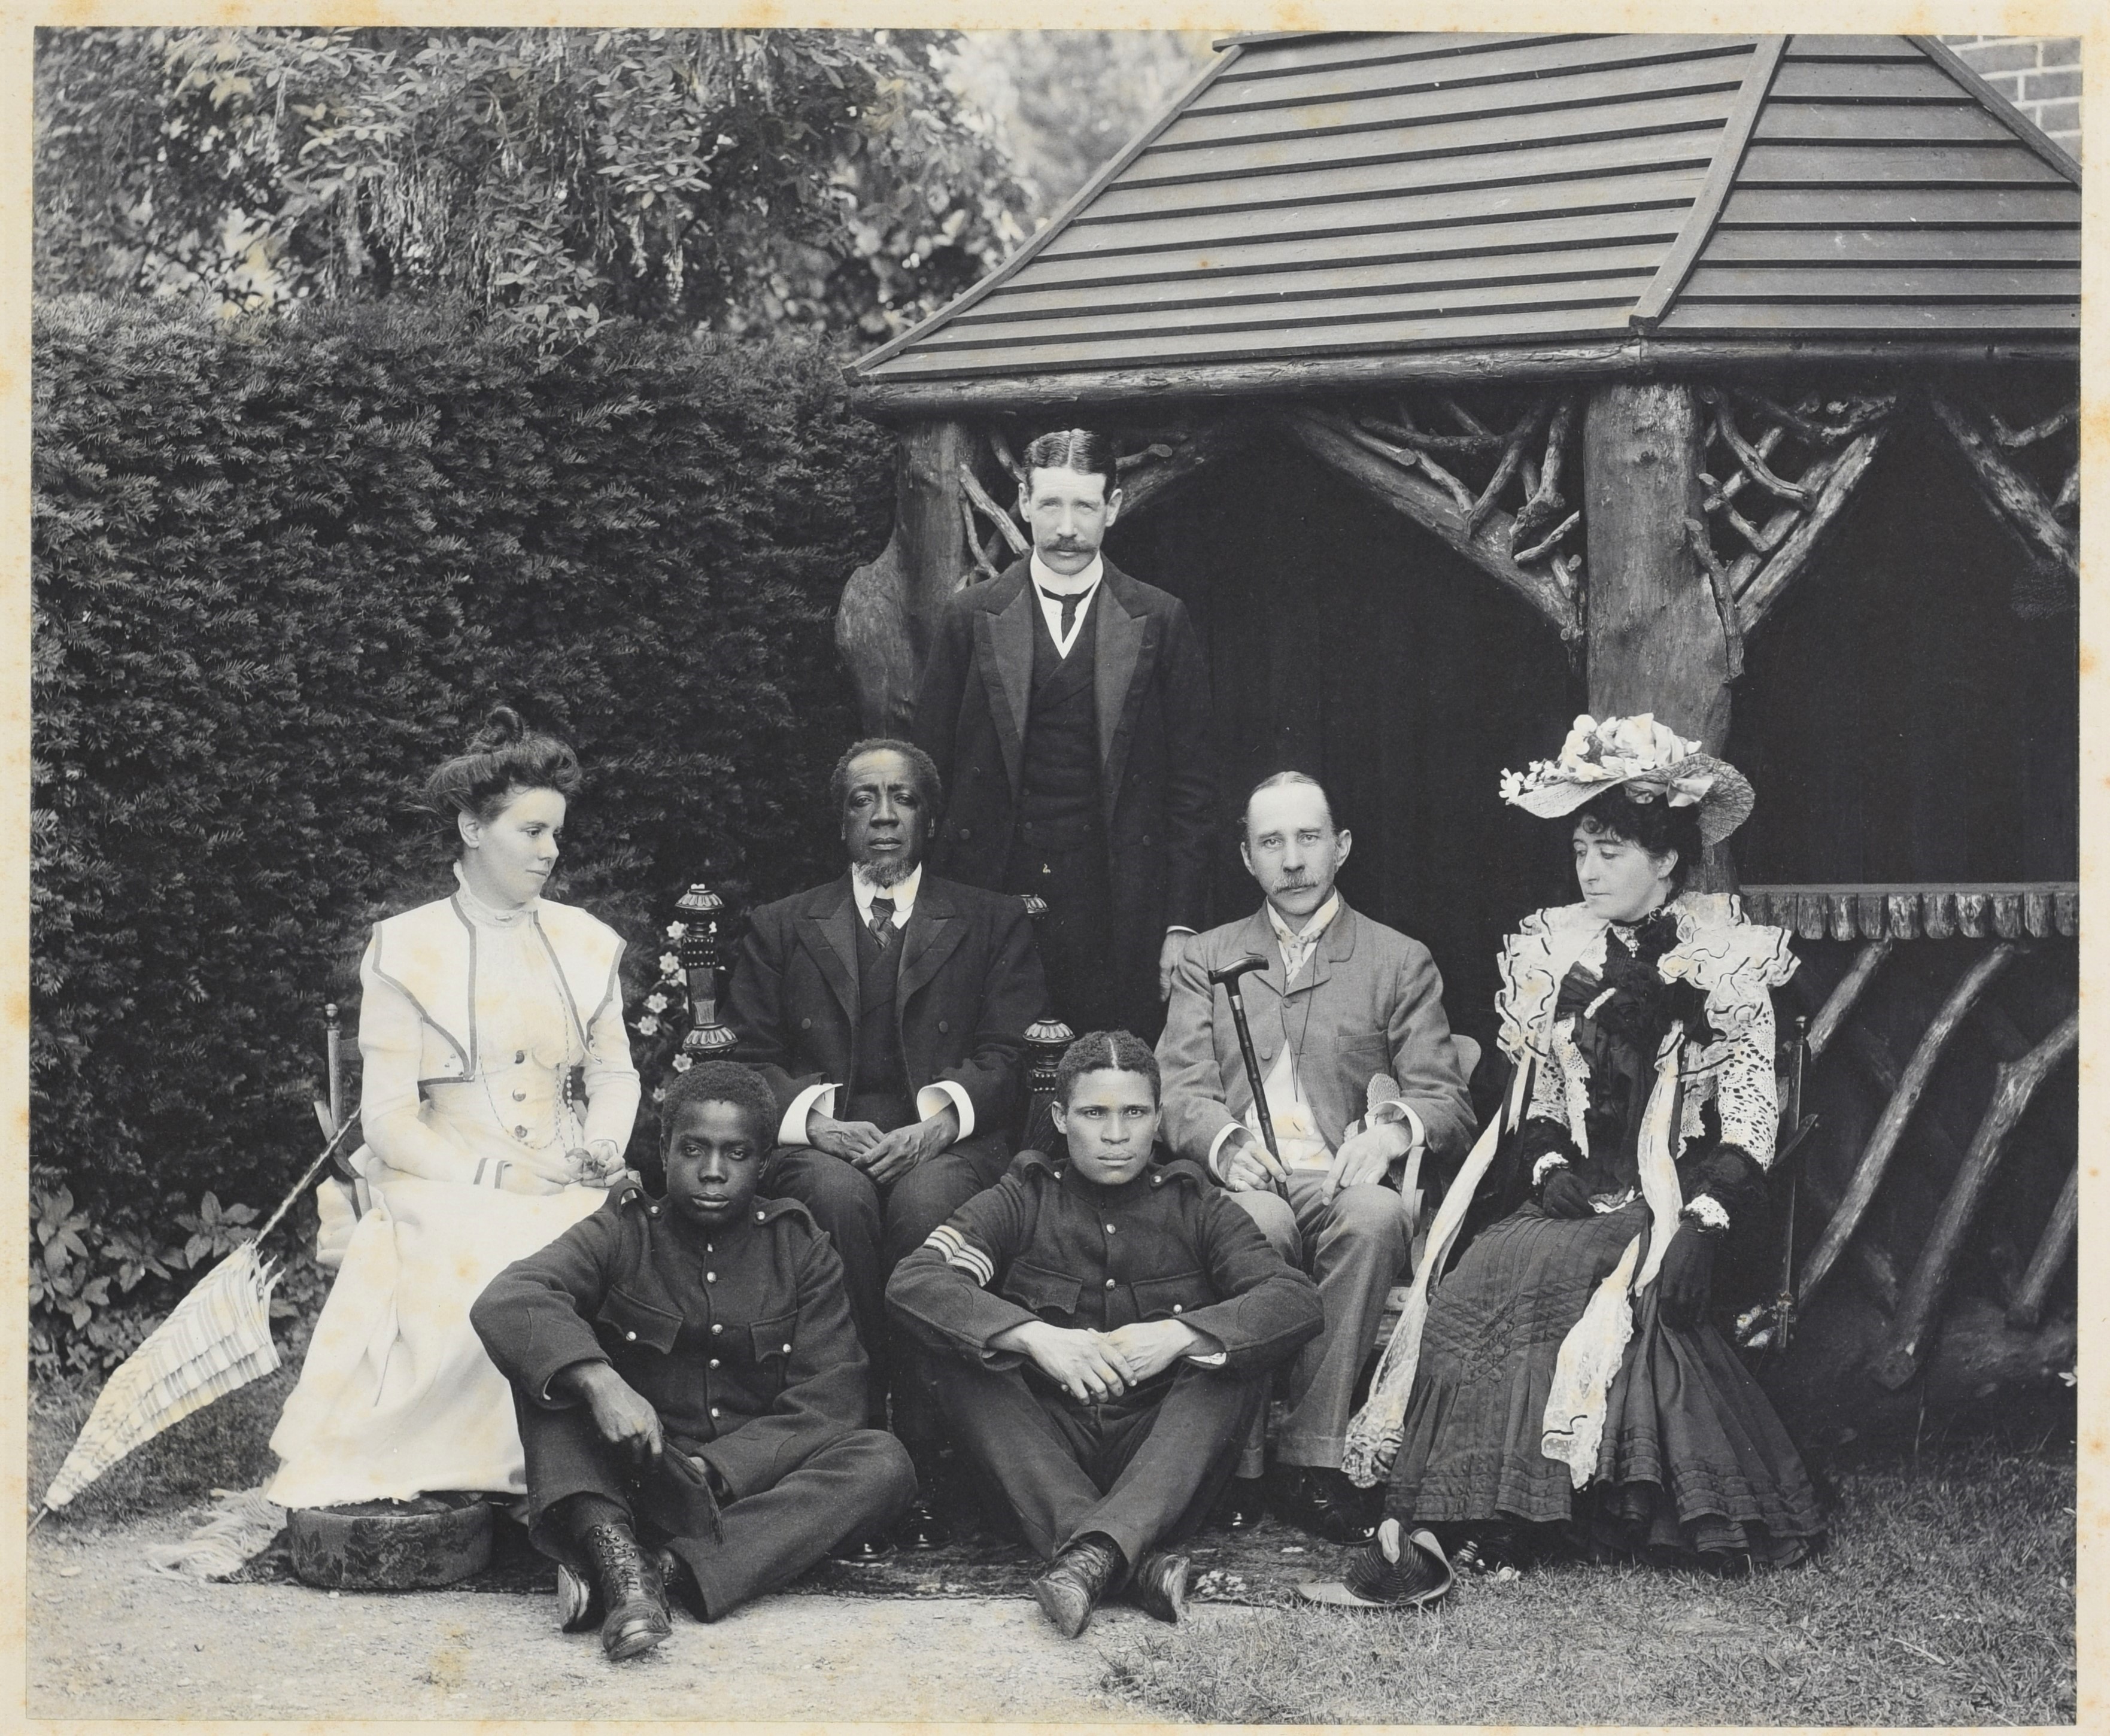 Photograph of Lewanika, King of Barotseland, with Philip and Edith Lyttleton Gell, 1901 (ref: D3287/99/18)